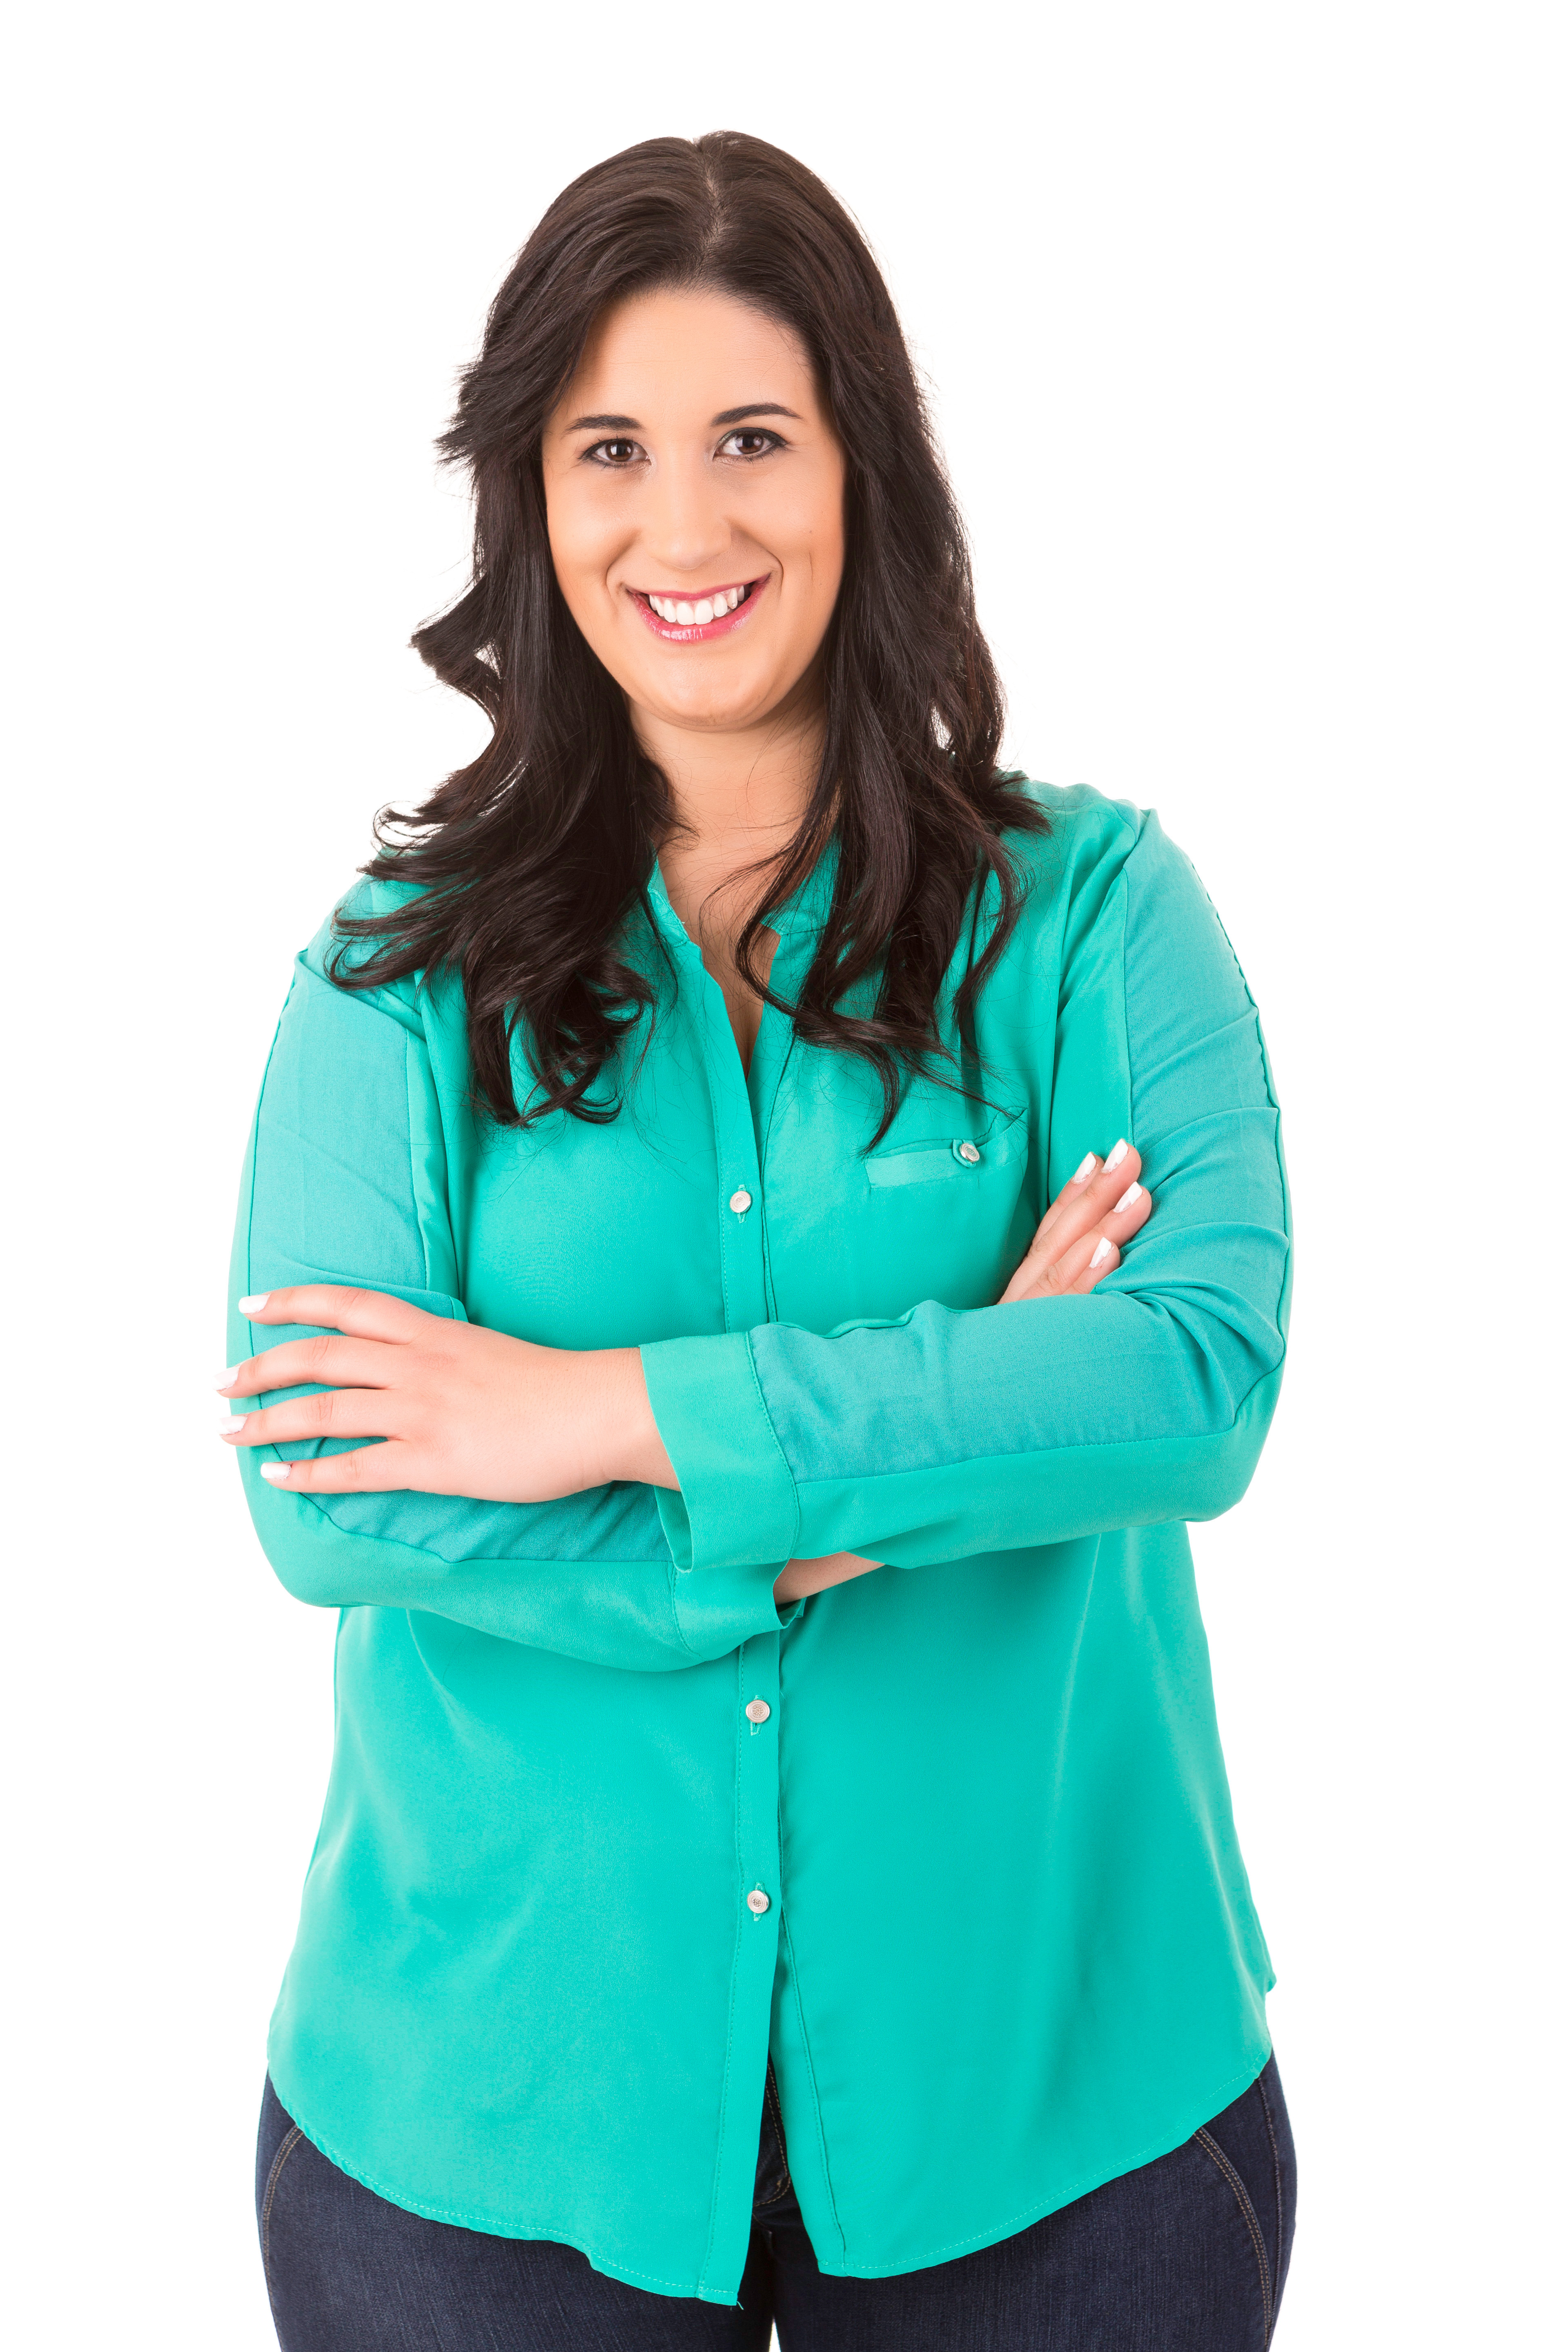 Smiling woman in teal long-sleeve button-down shirt with arms crossed.